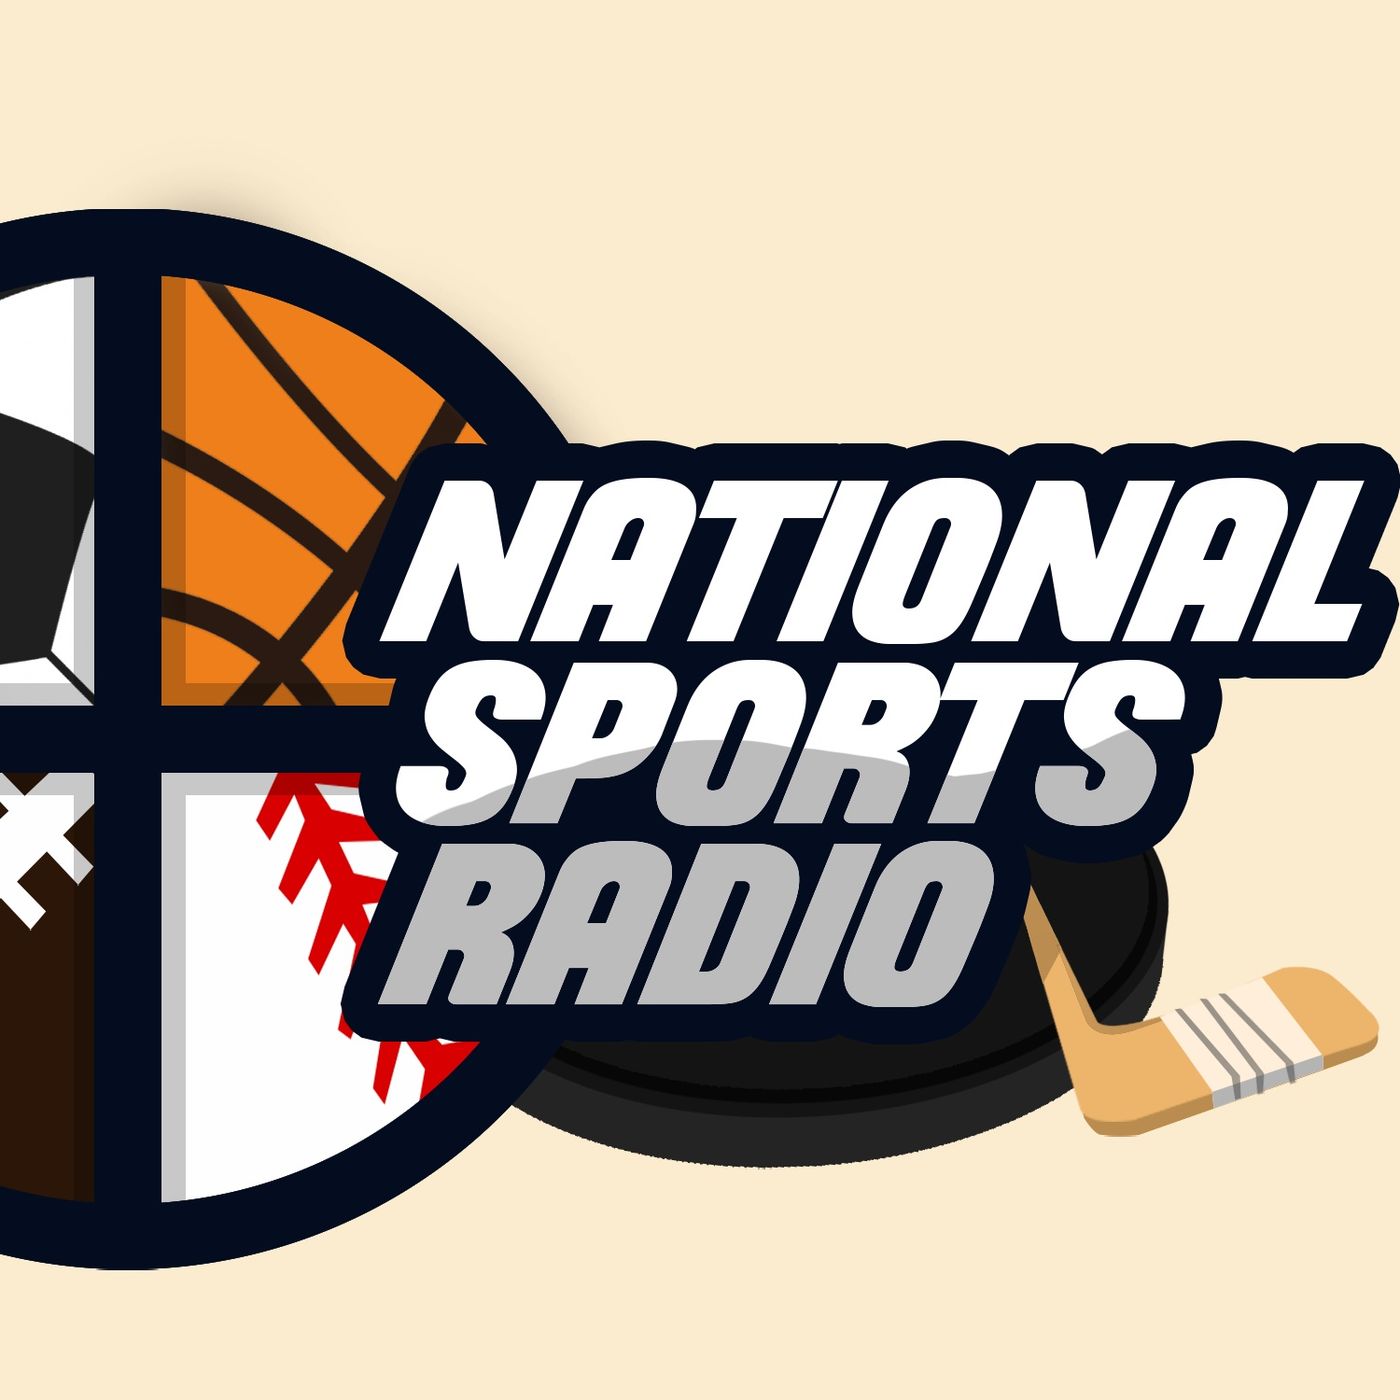 The NATIONALSPORTS Show